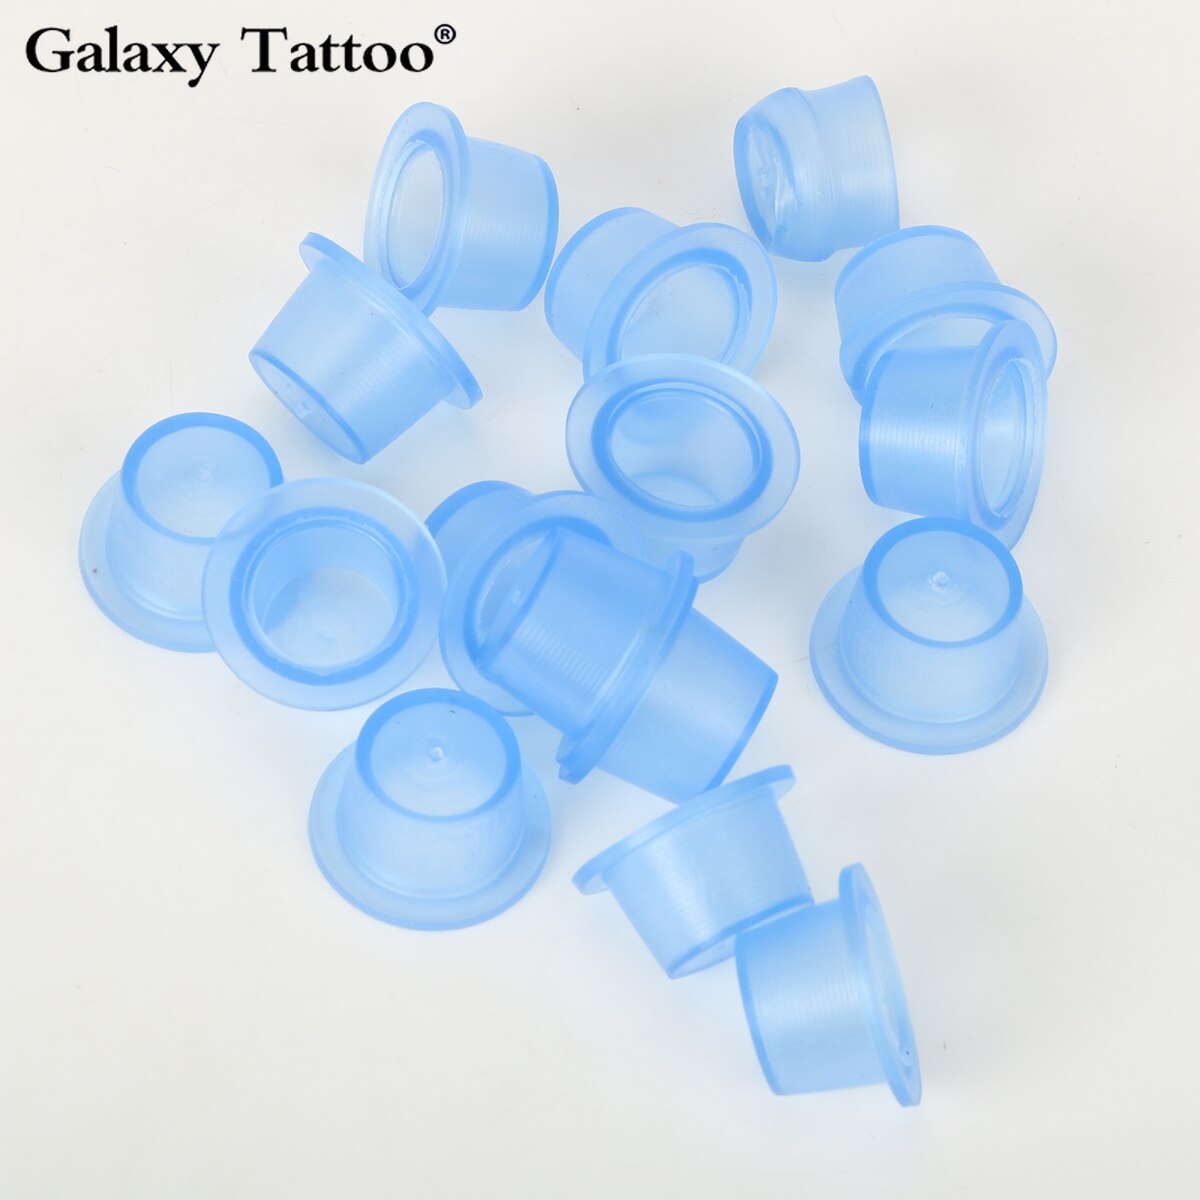 100 Stuks Tattoo Inkt Cup S/M/Zachte Siliconen Wegwerp Microblading Blauw Transparant Permanente Make-Up Accessoires Container